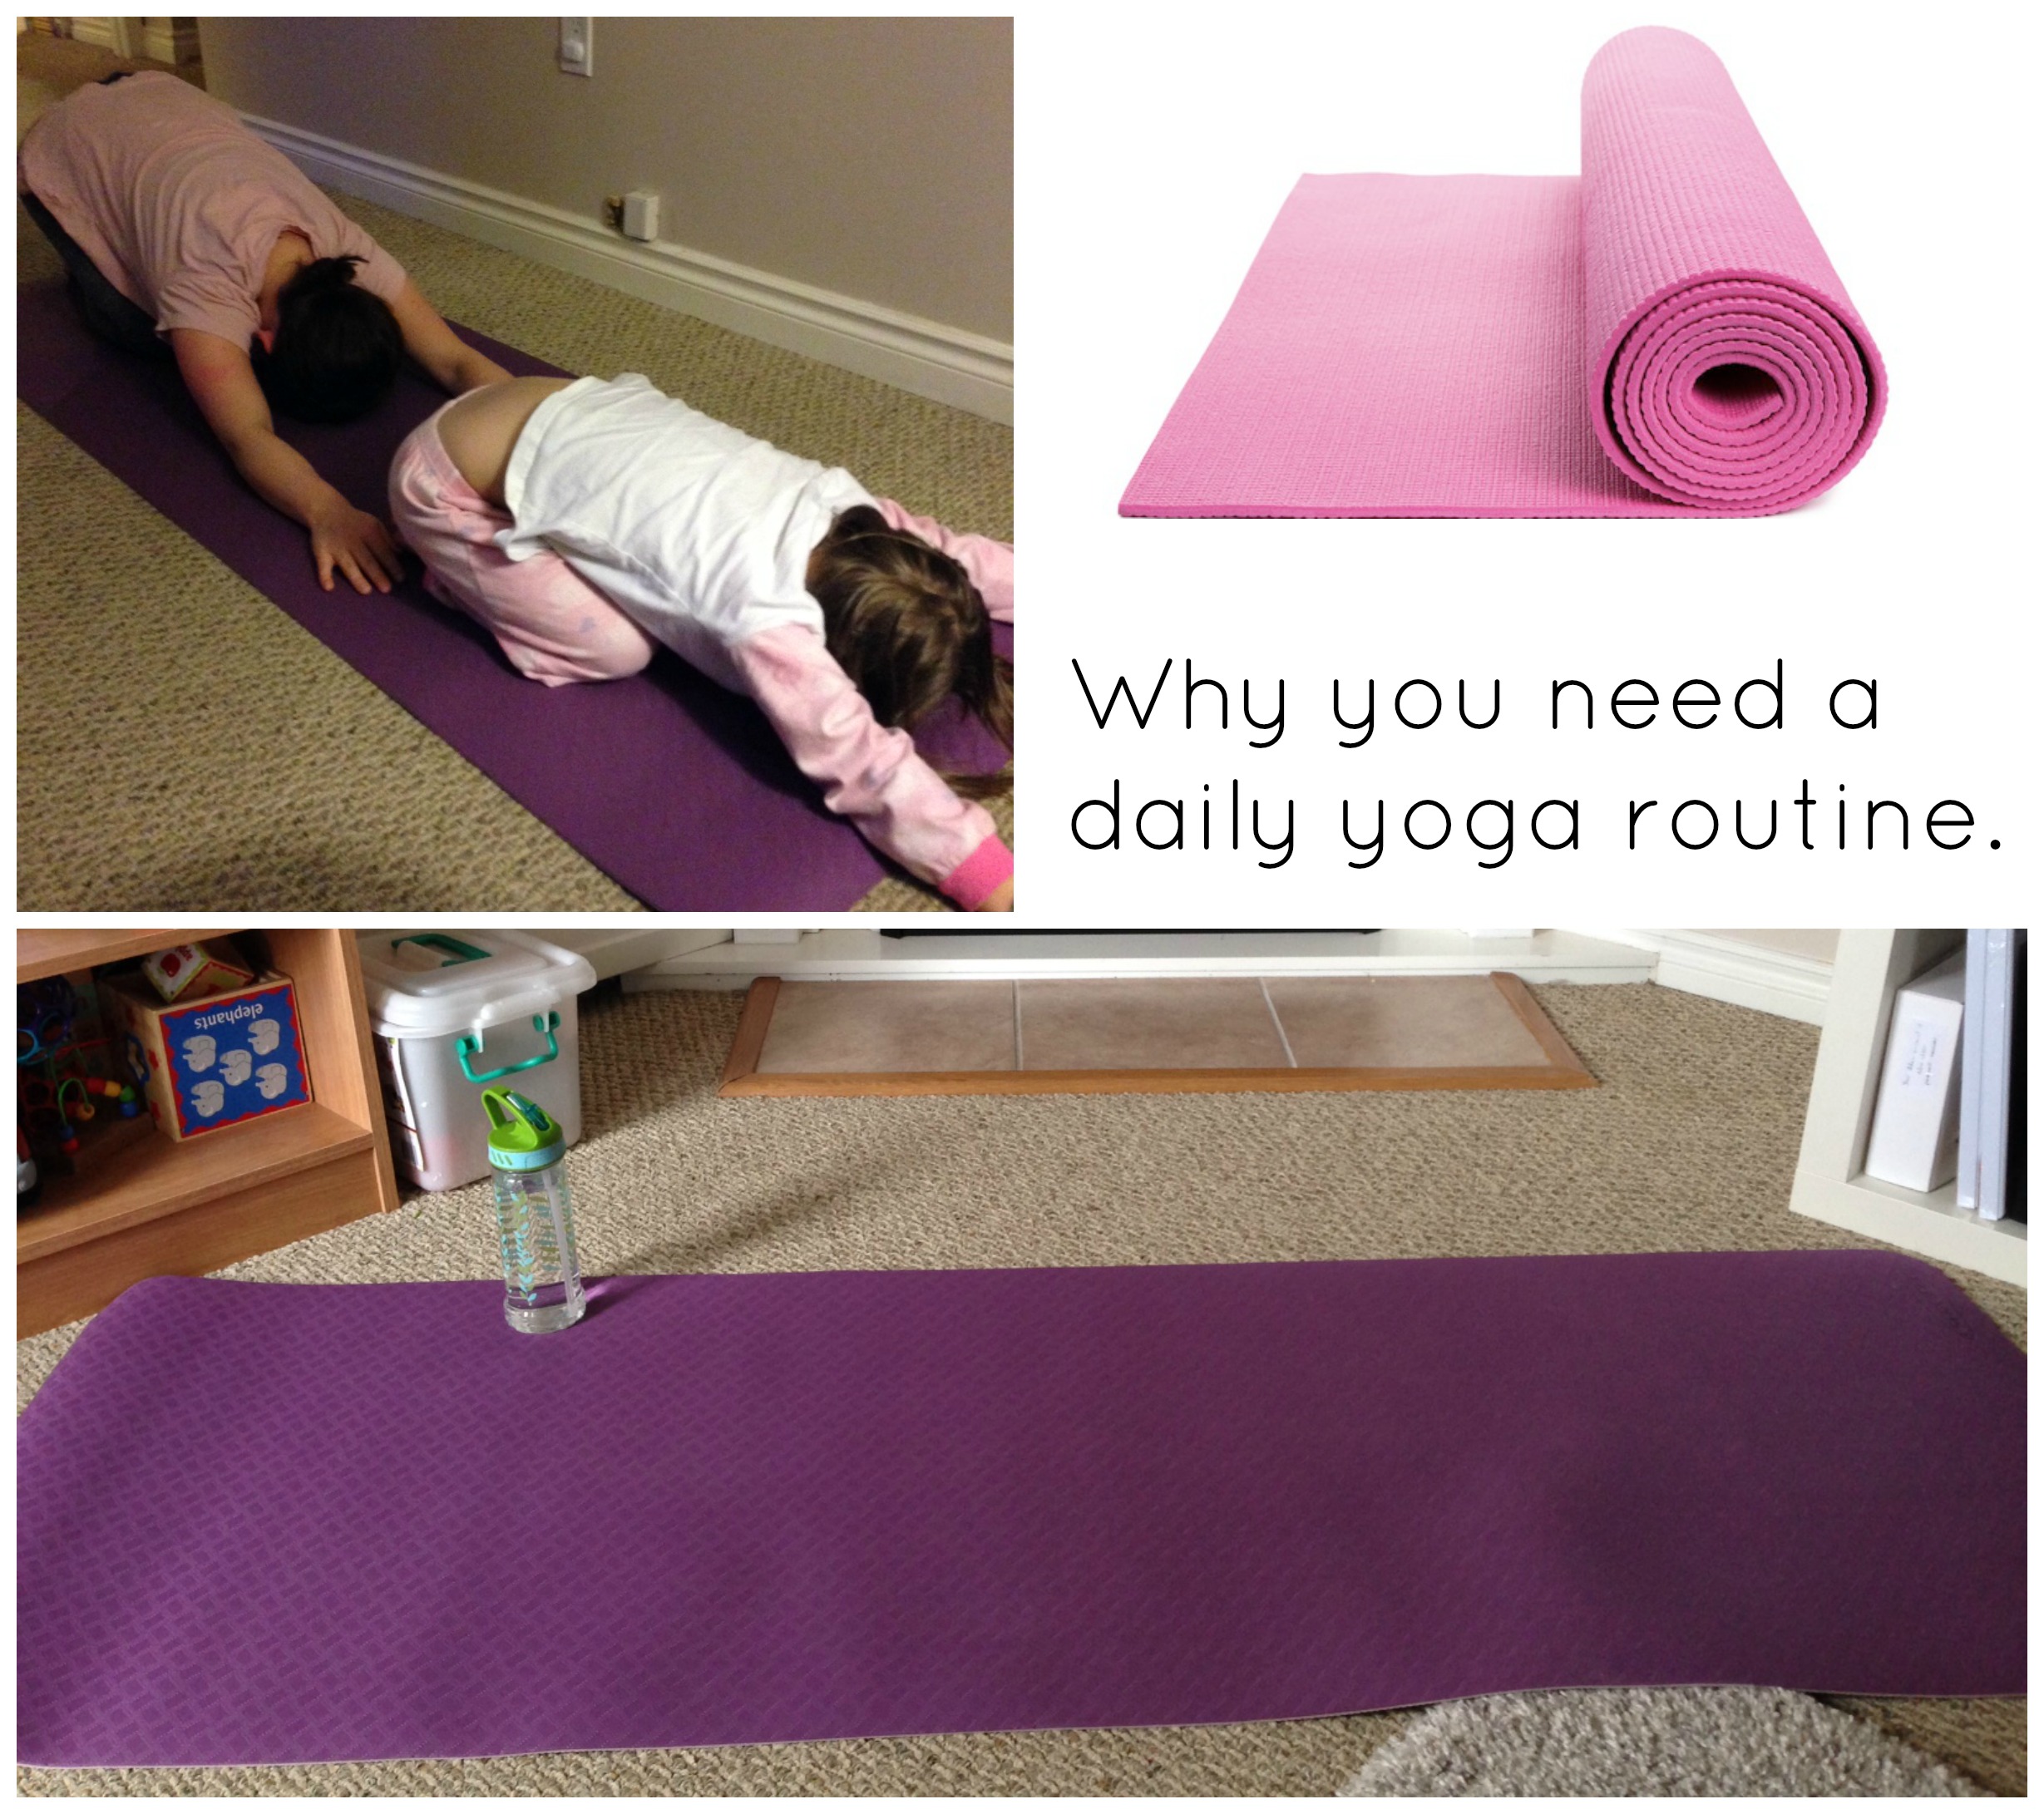 Why you need a daily yoga routine